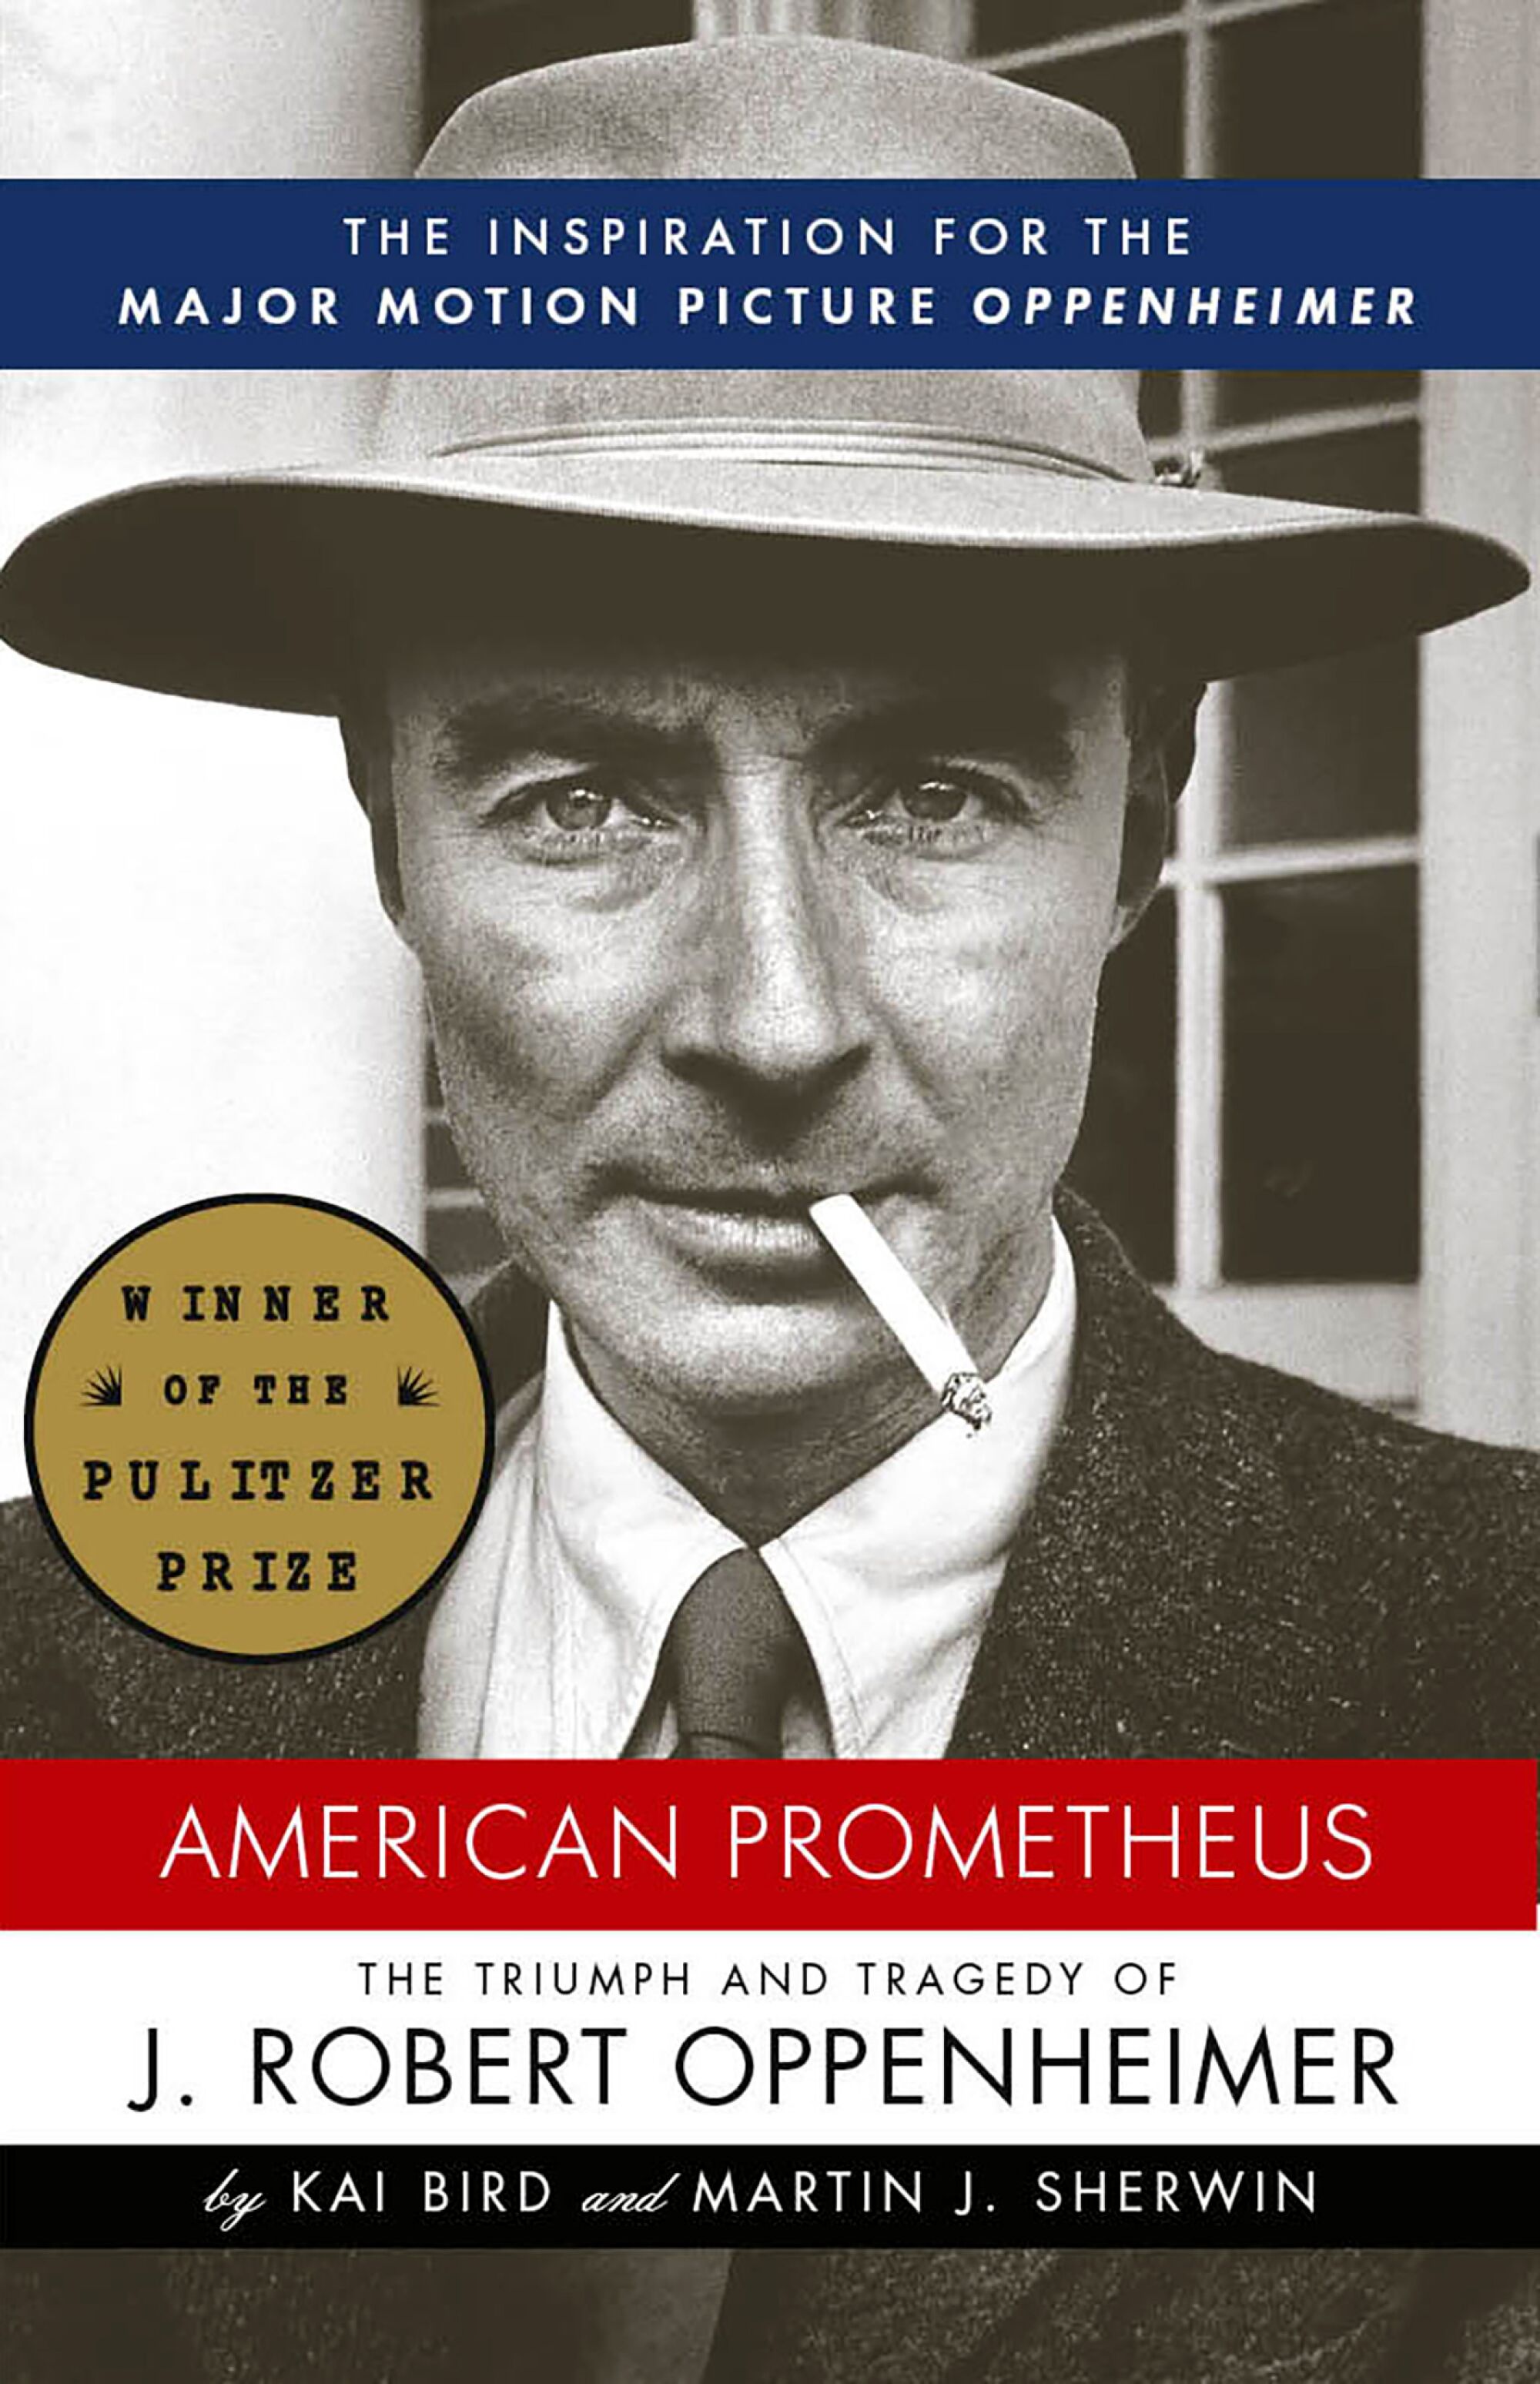 A book cover featuring the face of Oppenheimer wearing a hat, with the title "American Prometheus."